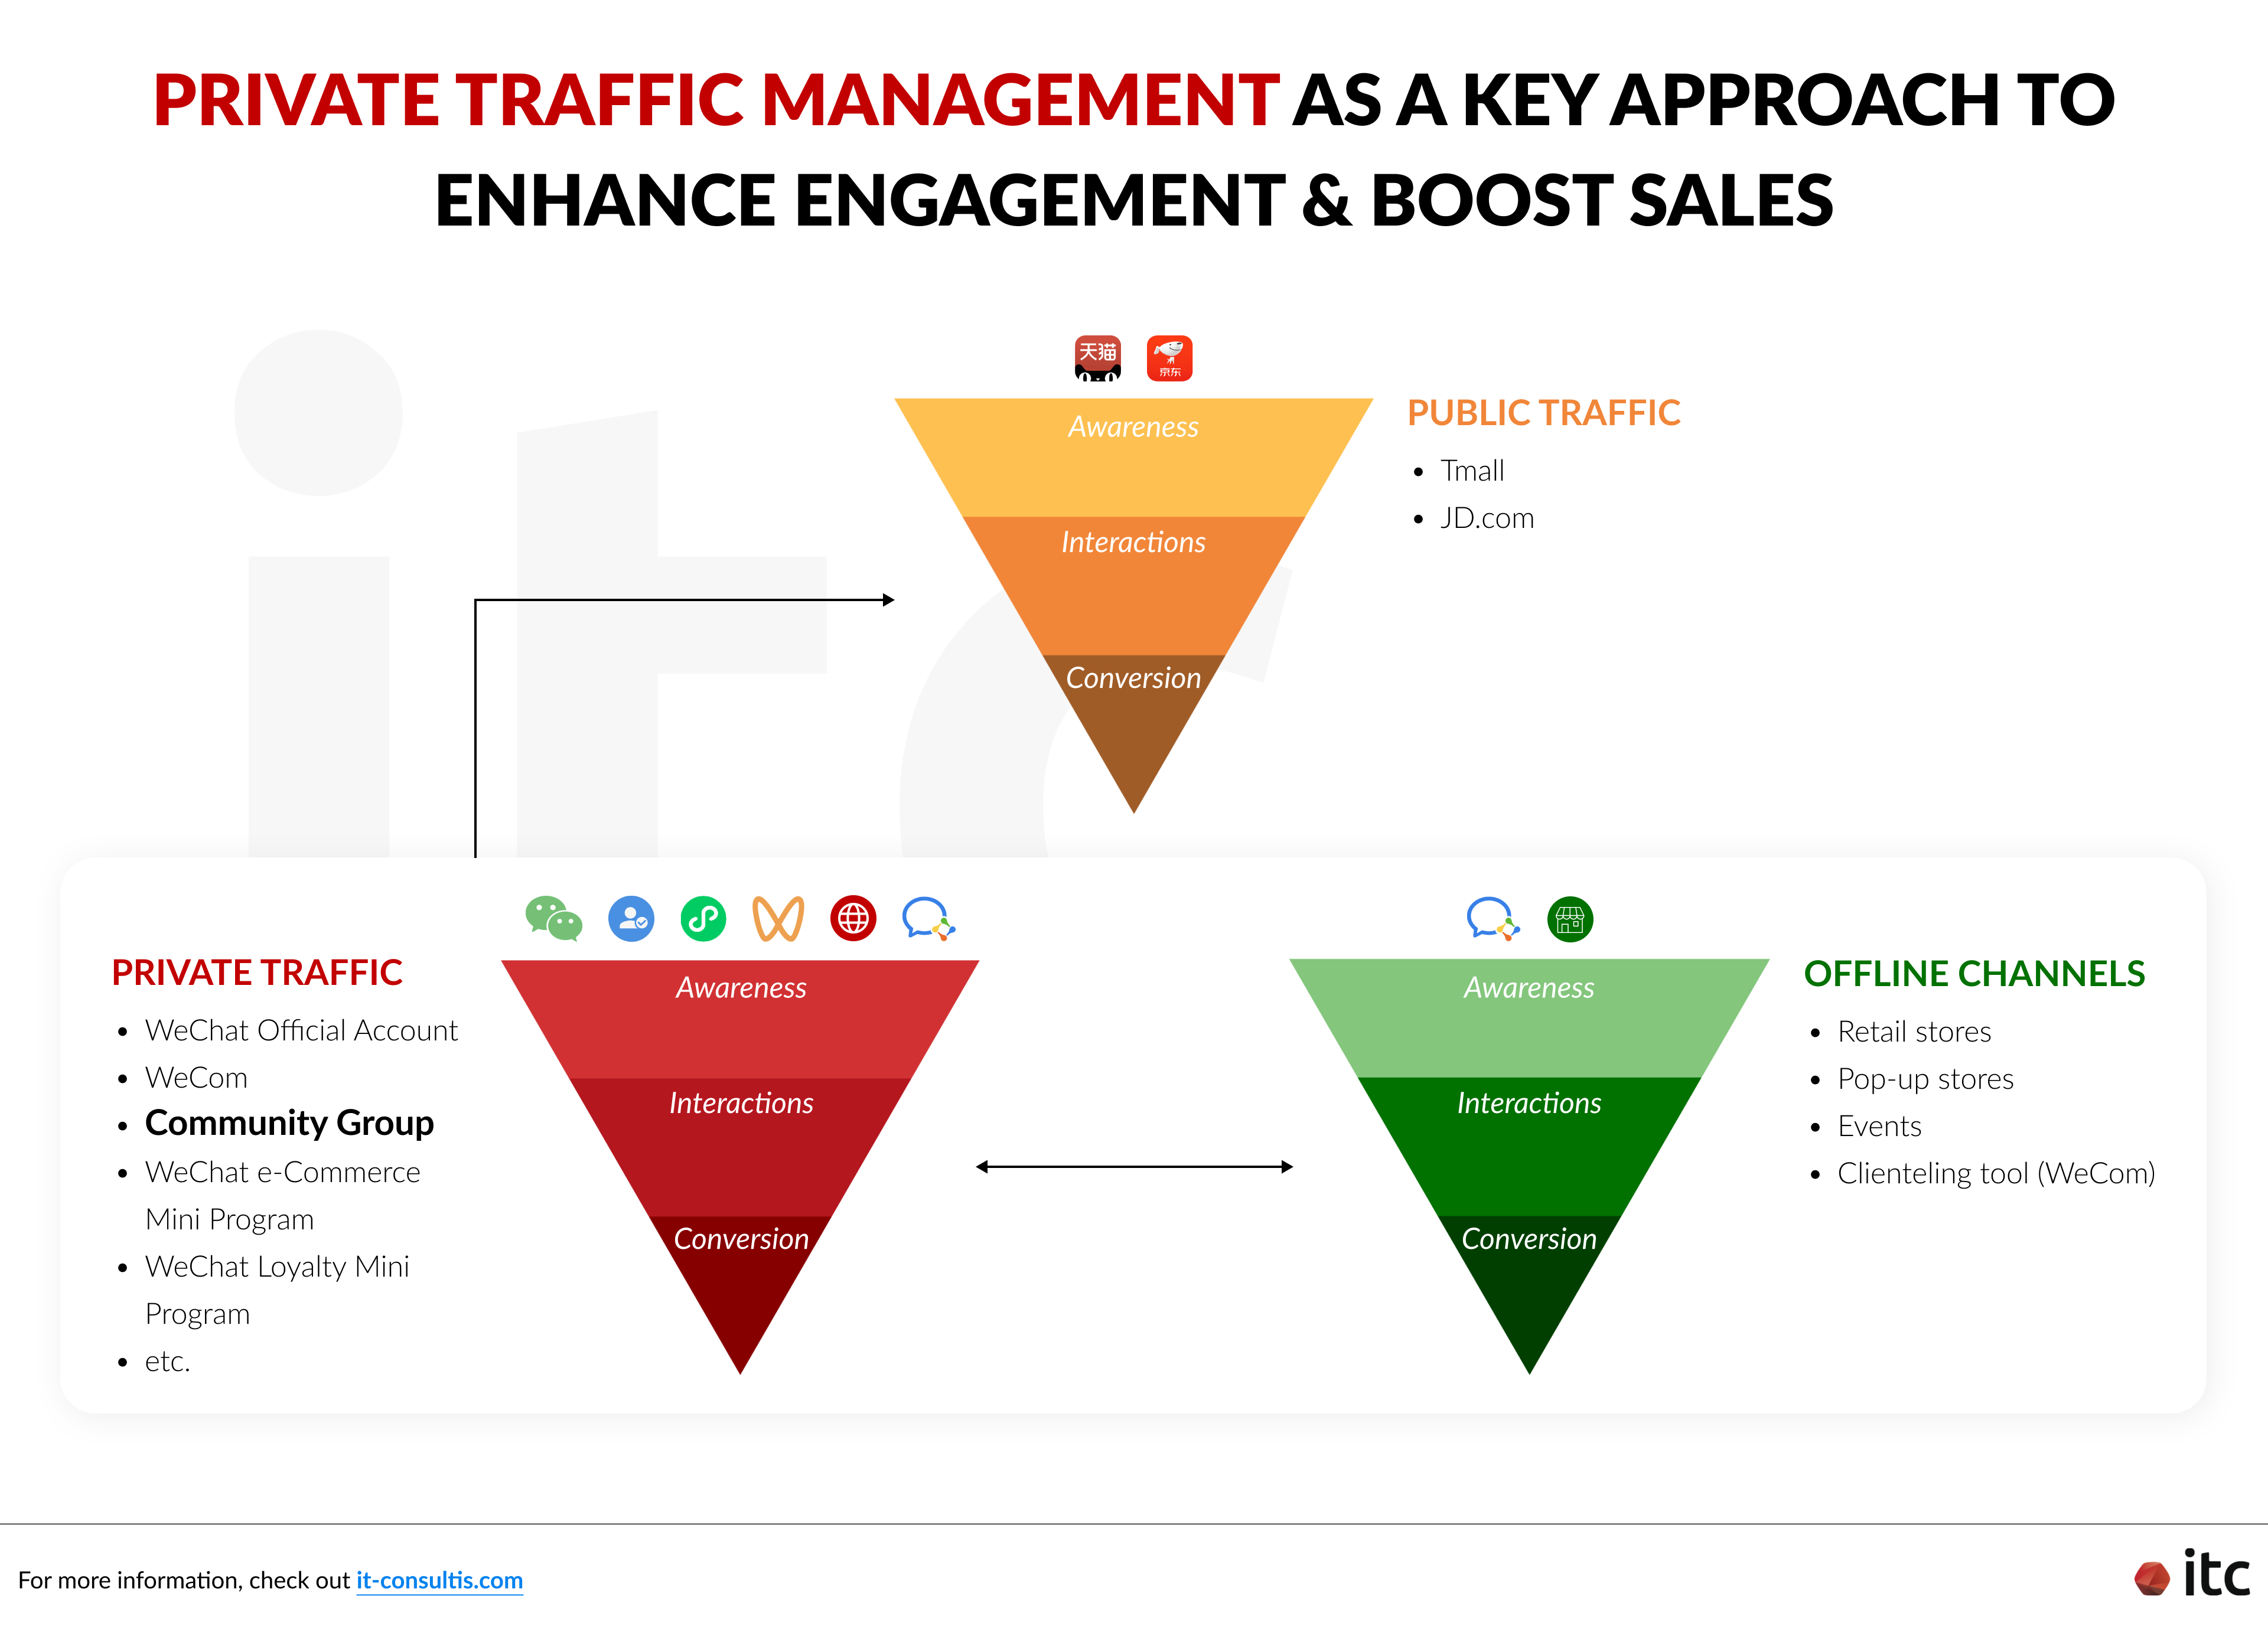 Private traffic management is a key approach in China to enhance customer engagement and boost sales, including managing community groups via WeCom (WeChat Work)